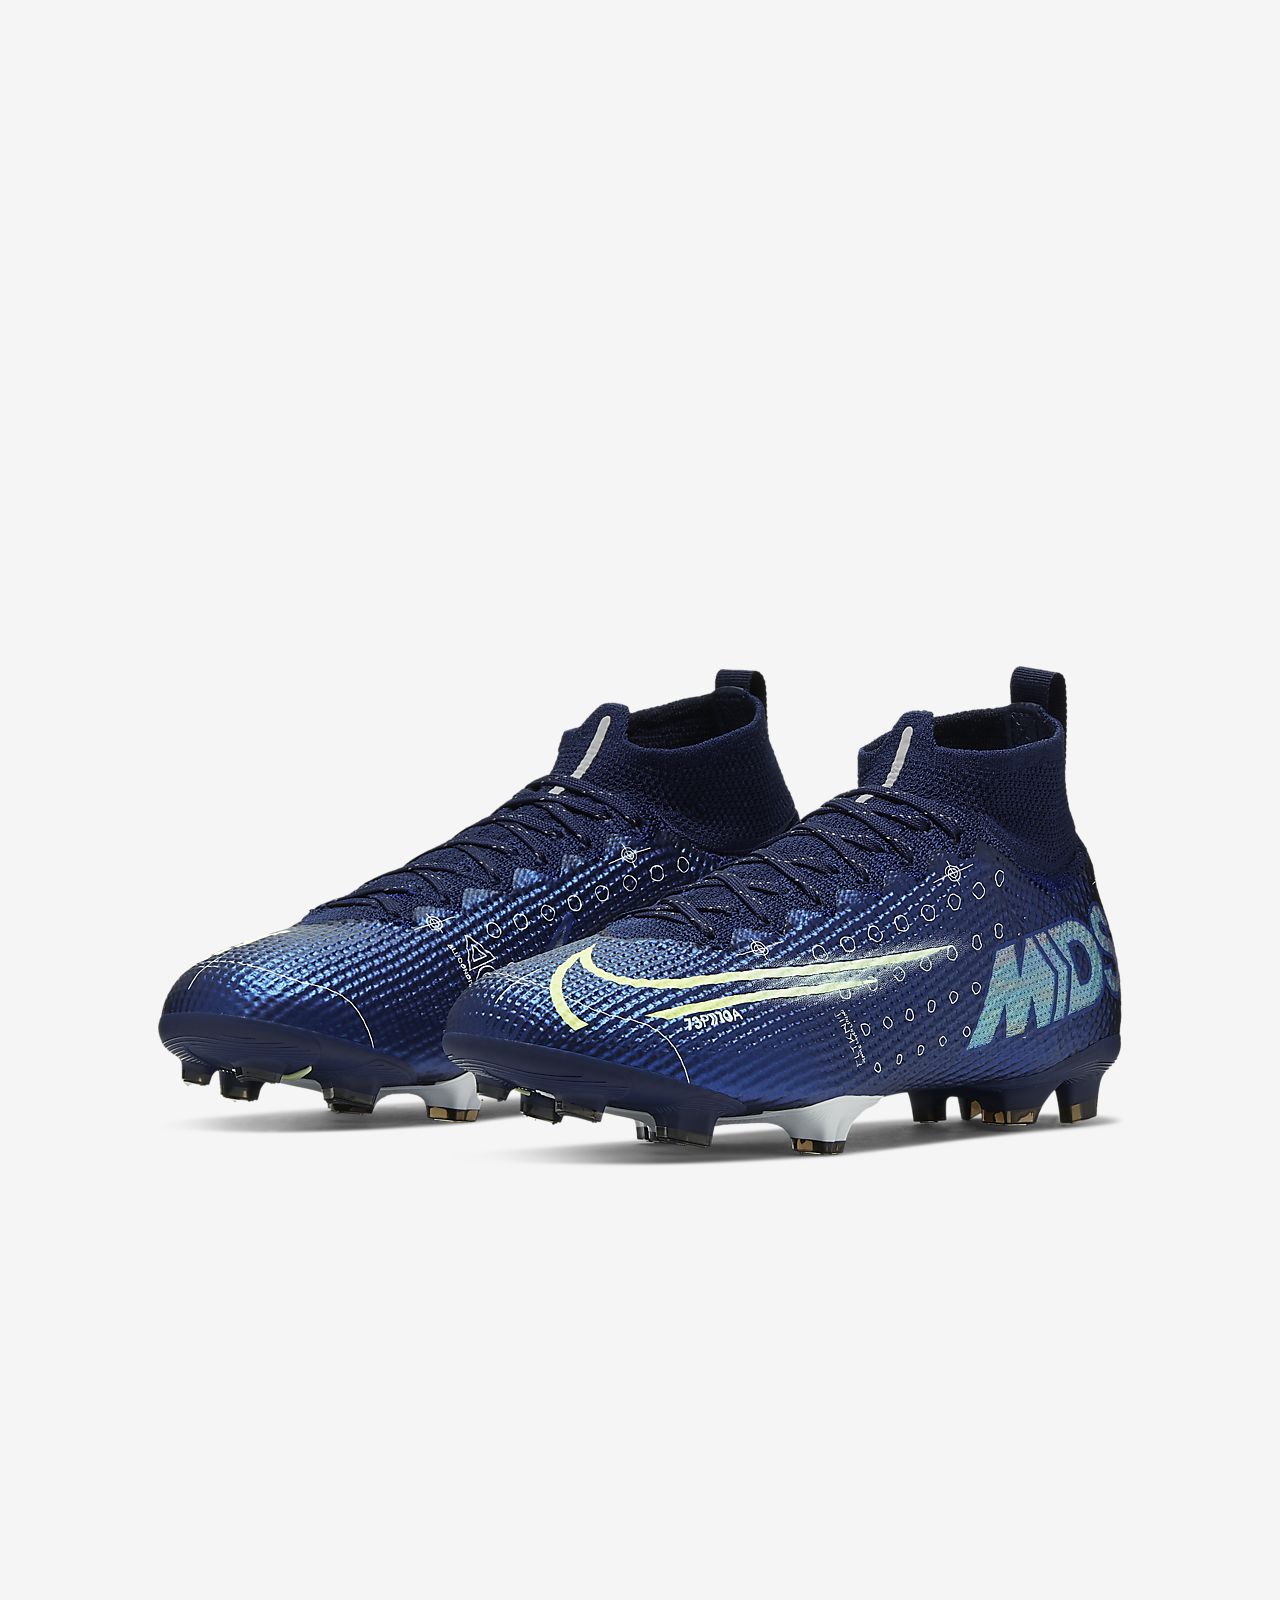 Nike Mercurial Superfly 7 Academy FG MG Kinder AT8120 606